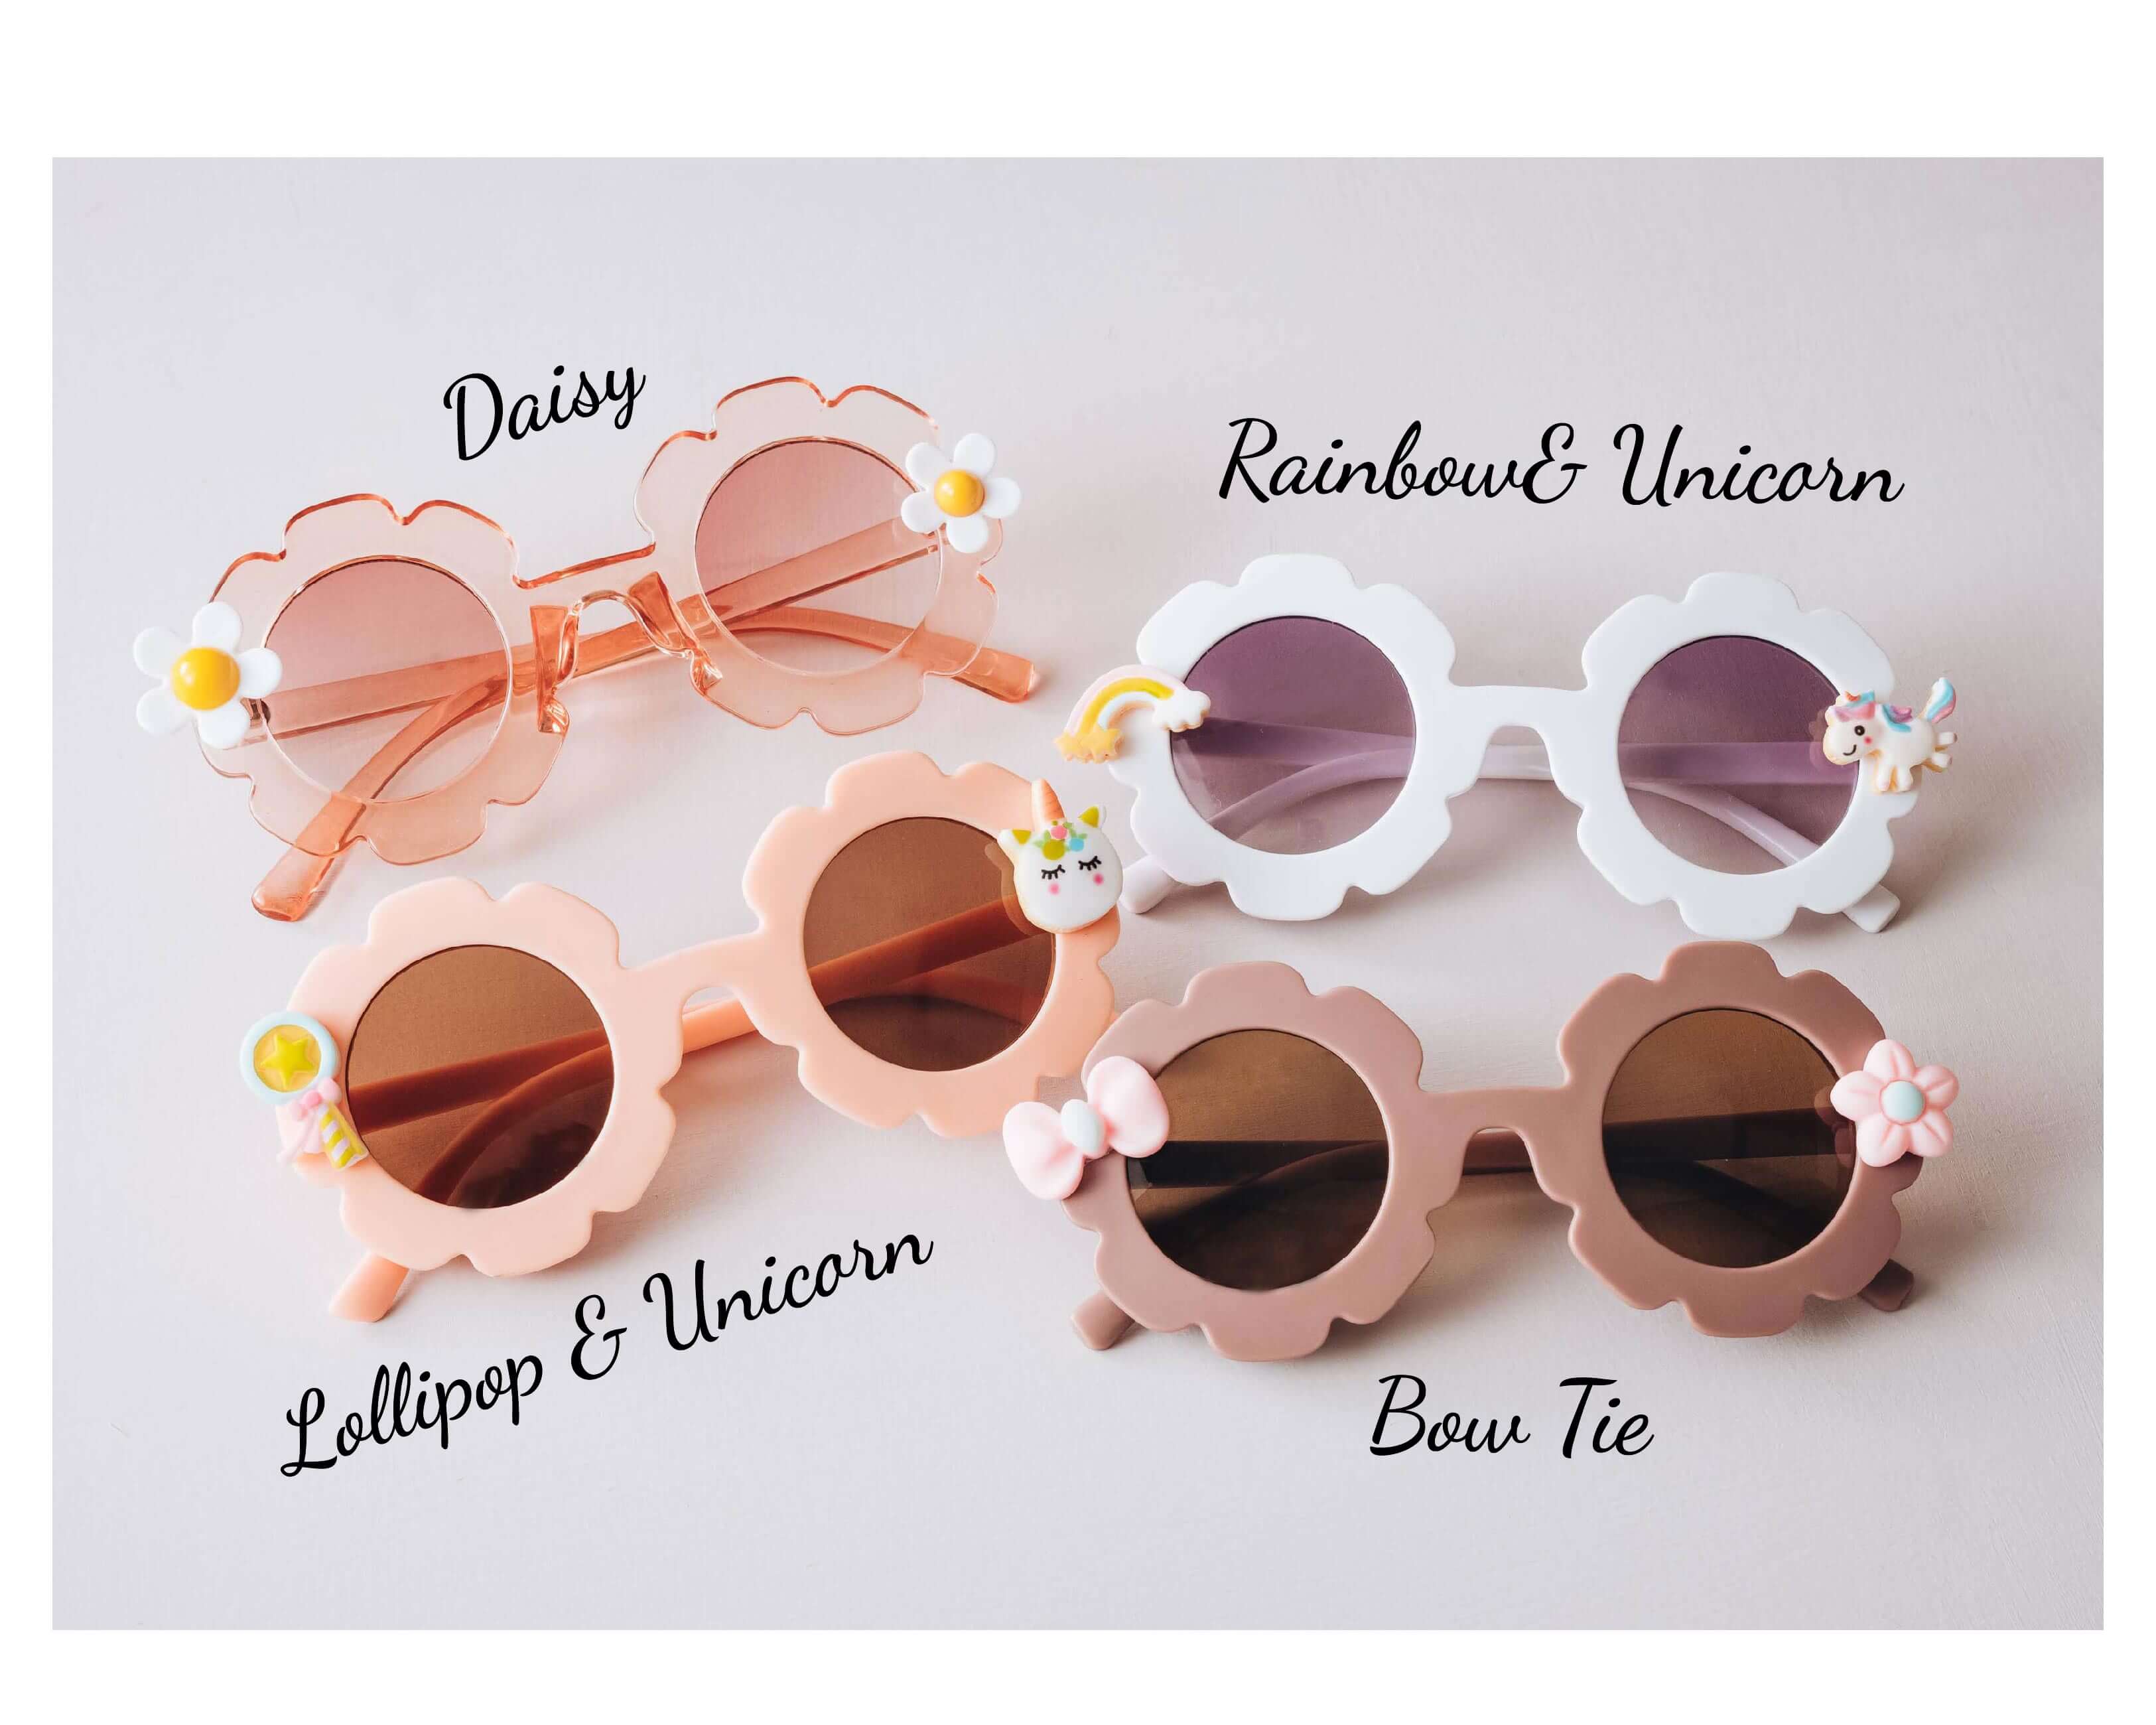 Personalized Flower Girl Sunglasses with Daisy, Rainbow & Unicon, Lollipop & Unicon and Bow Tie designs.  - Hundred Hearts